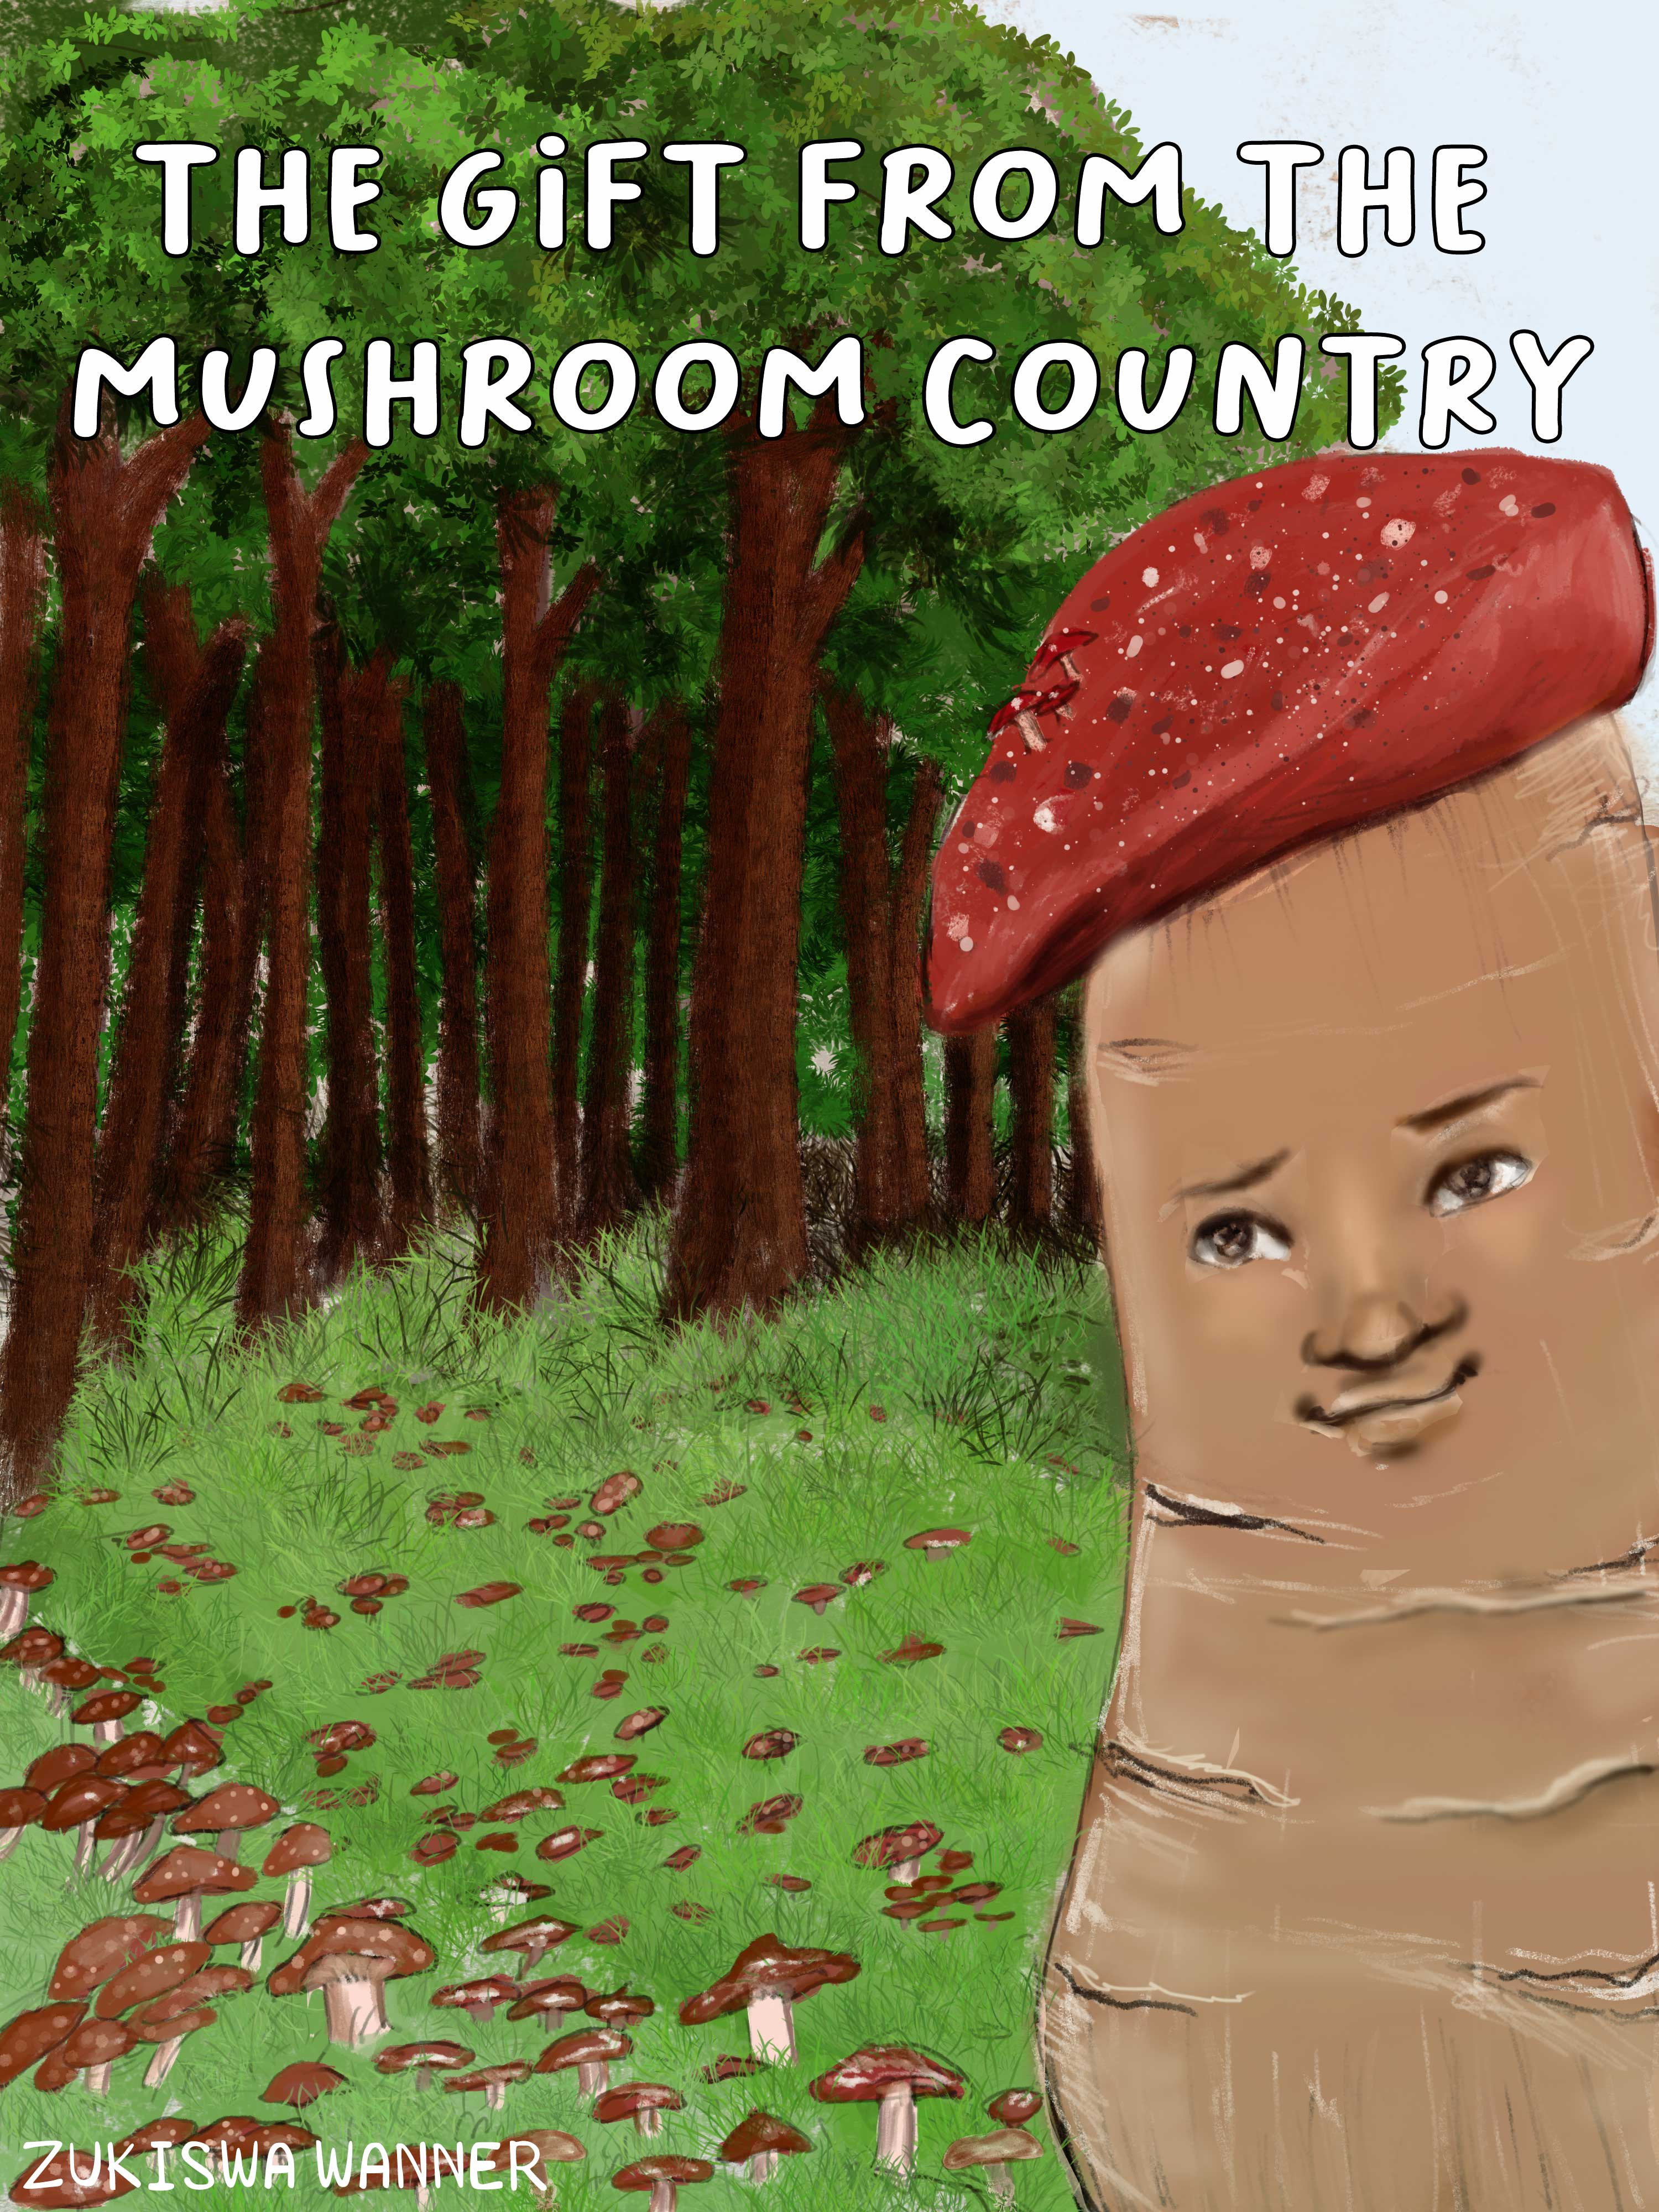 The Gift from the Mushroom Country